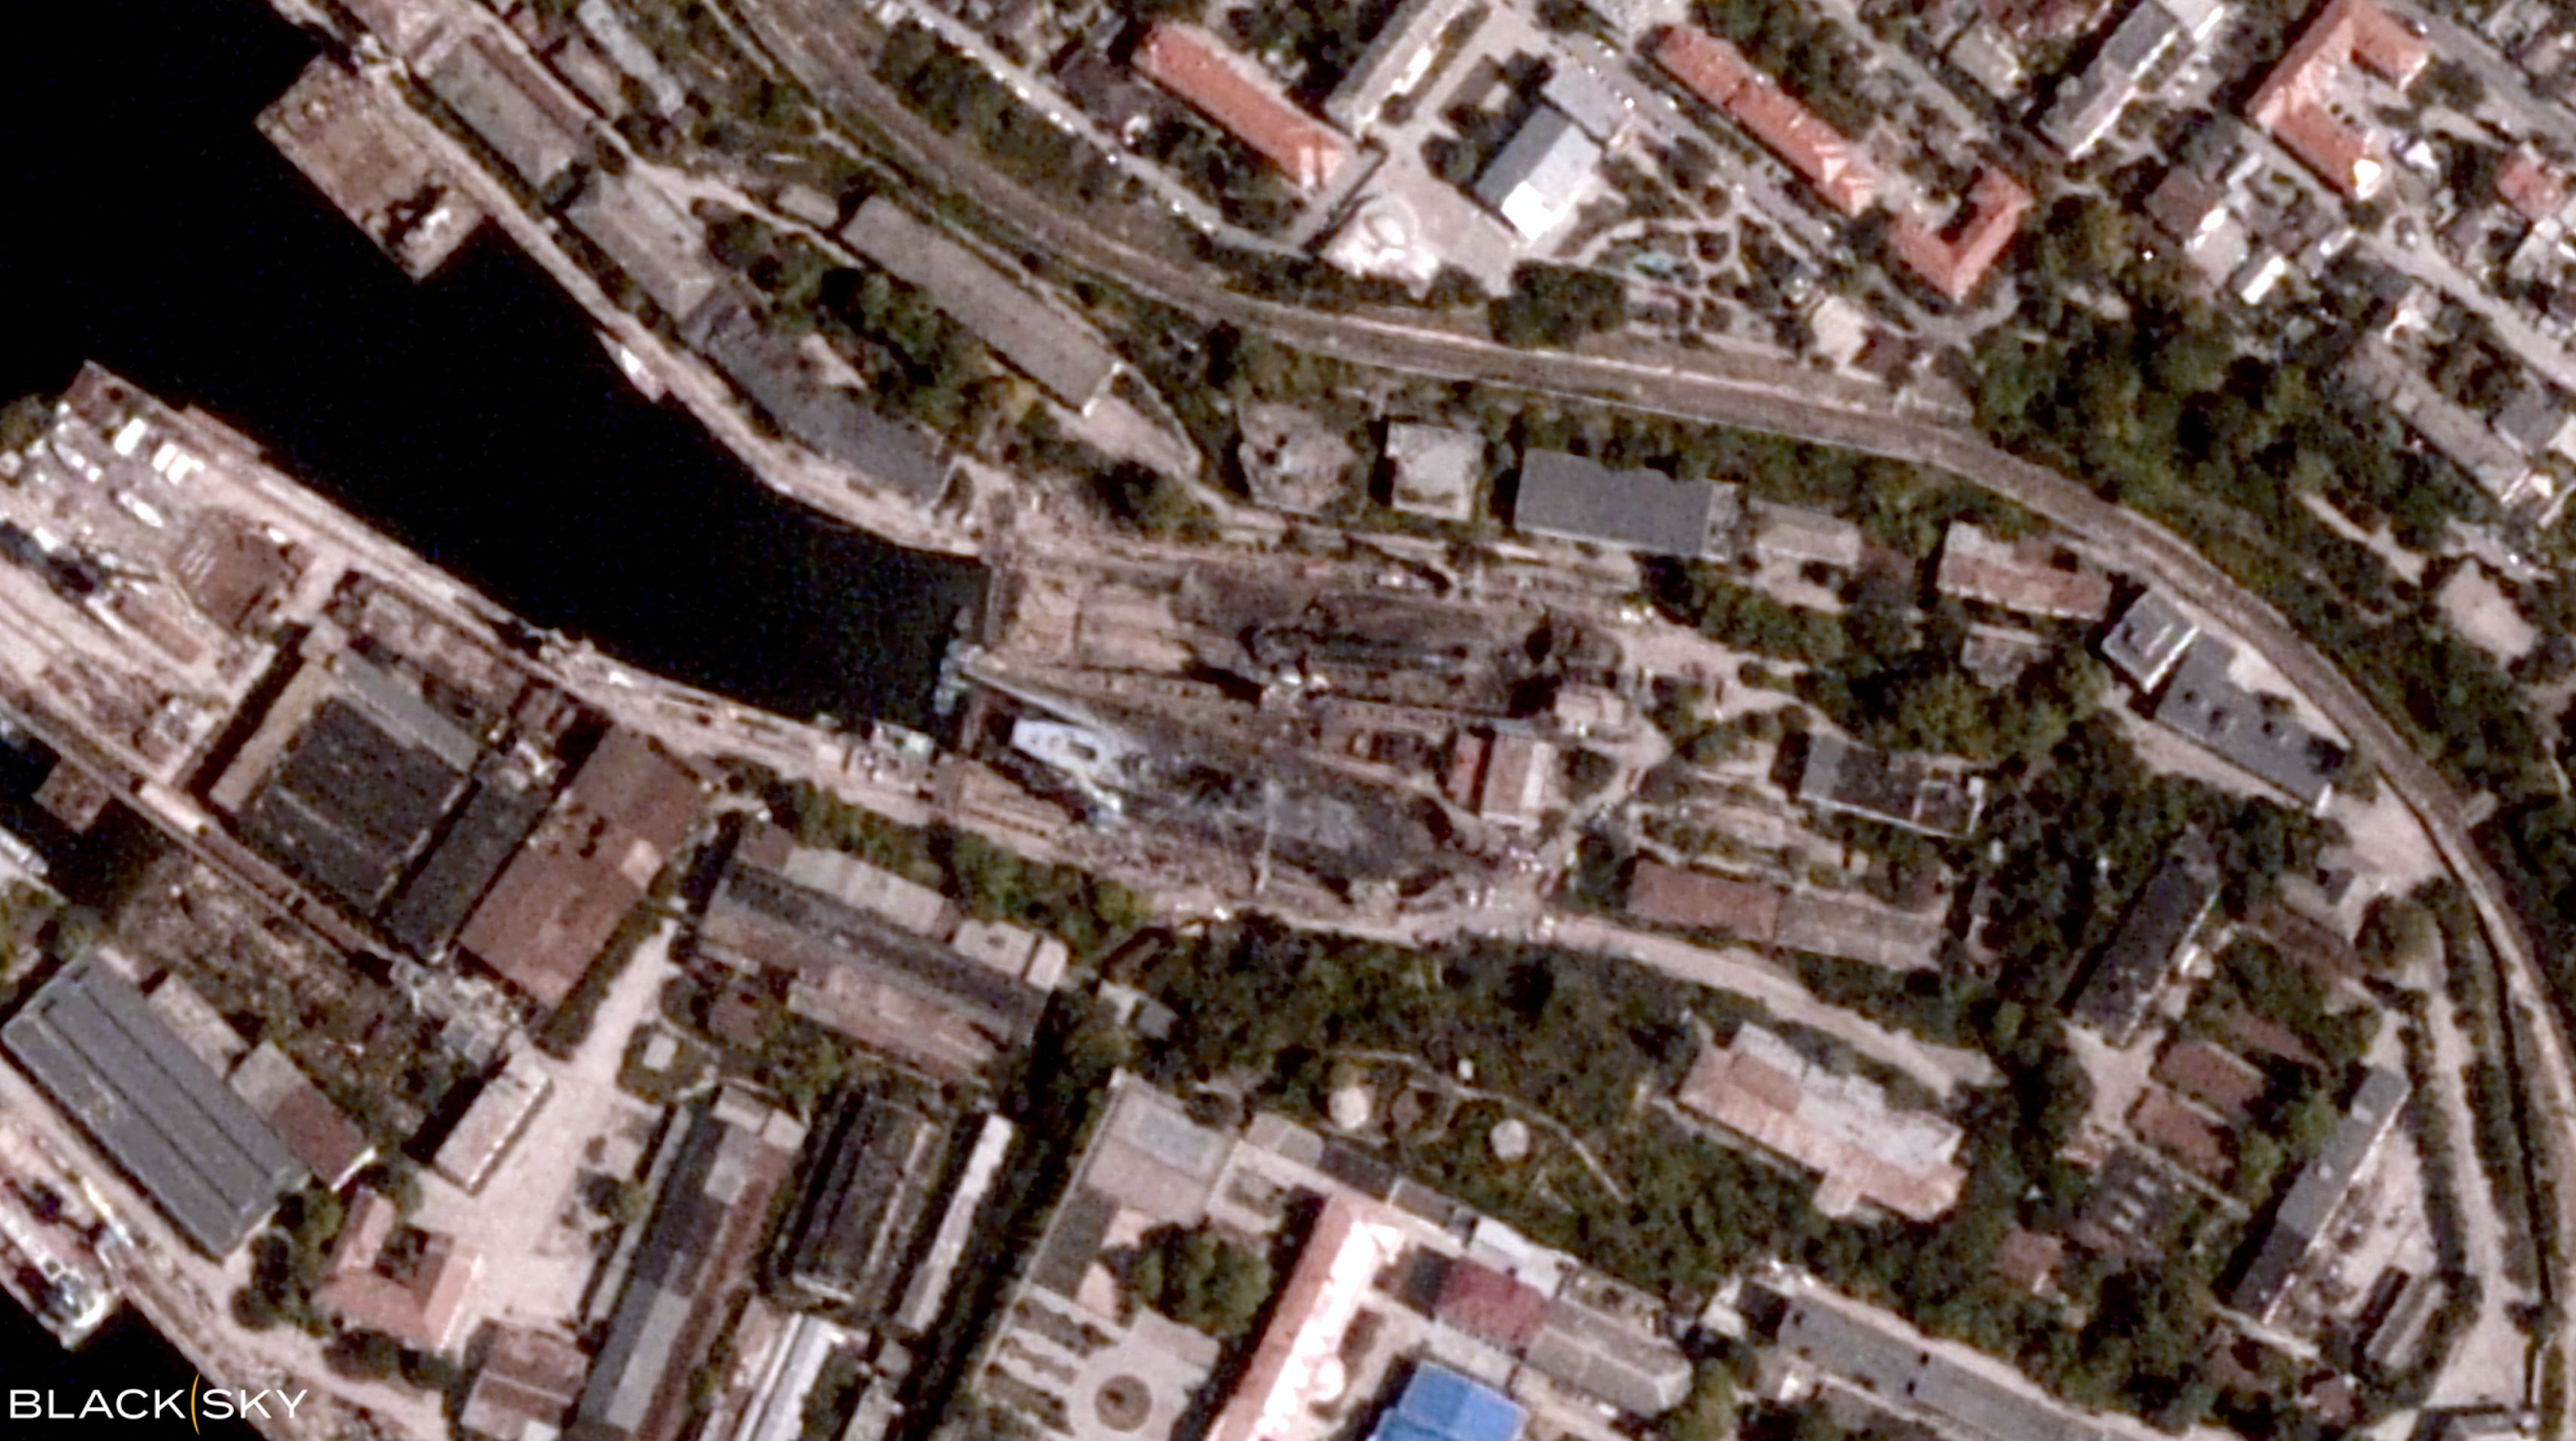 Satellite images show damage to Russian naval vessels struck in Ukraine attack